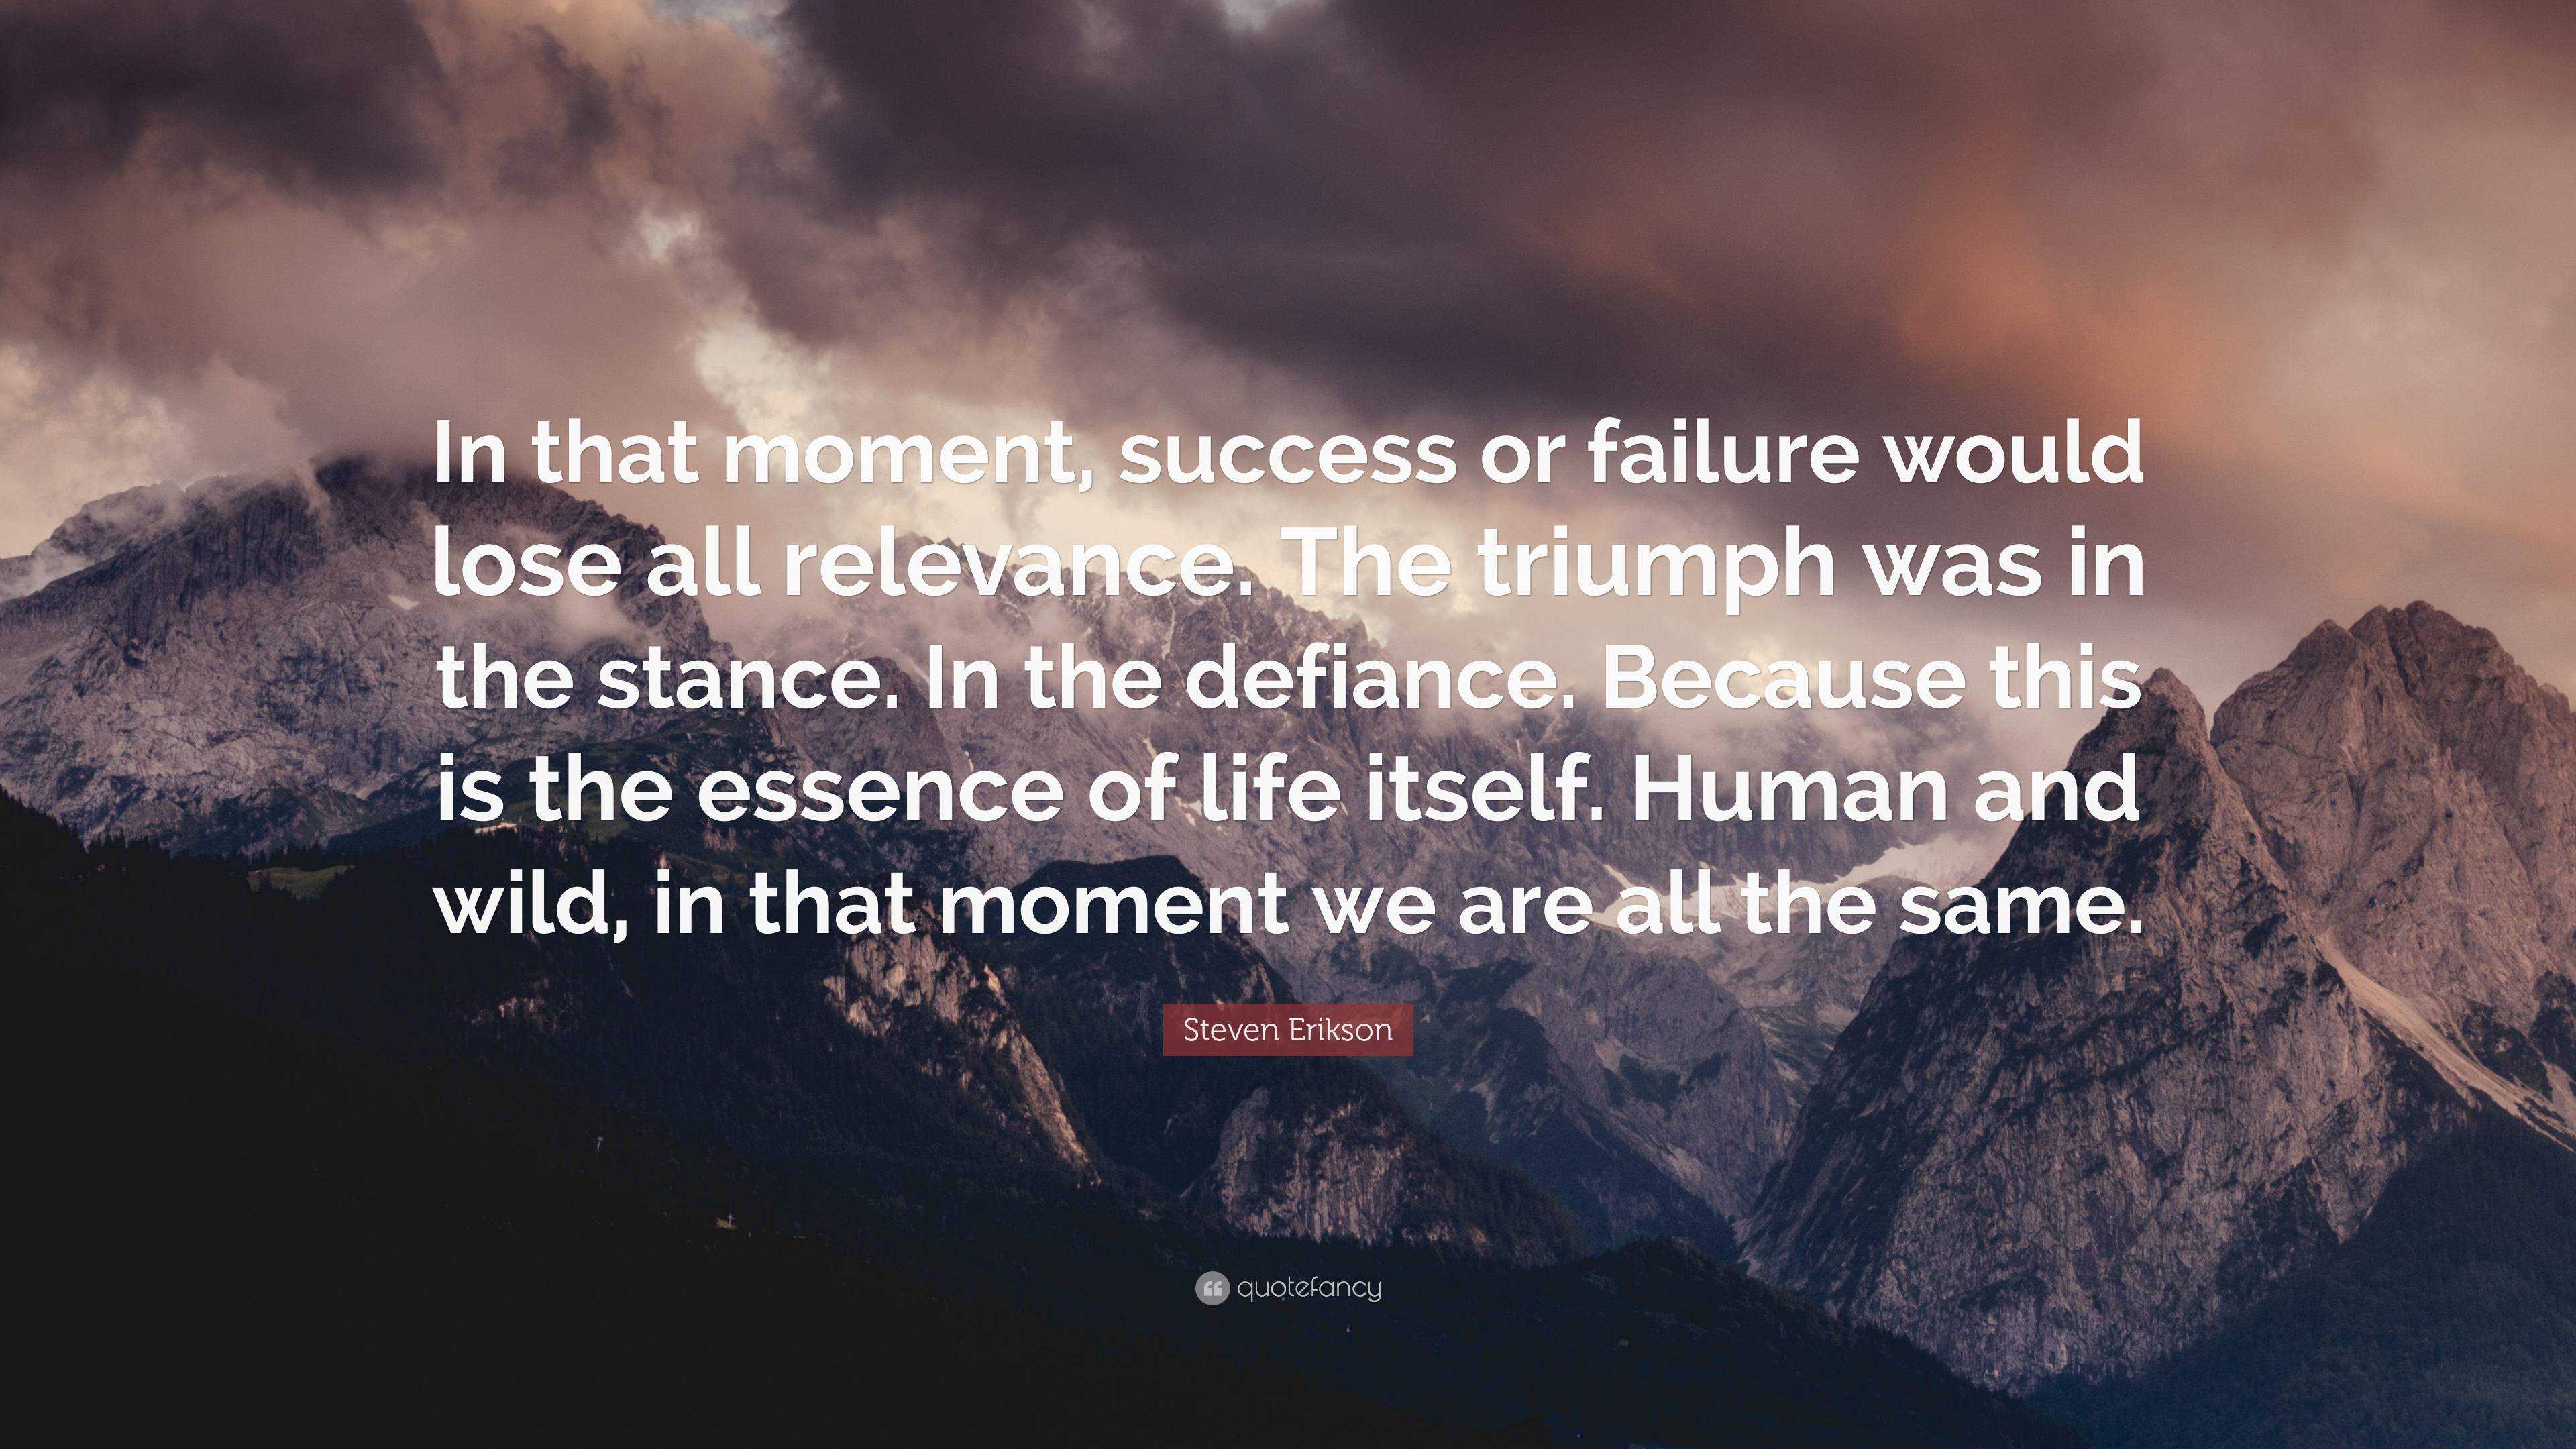 Steven Erikson Quote: “In that moment, success or failure would lose ...